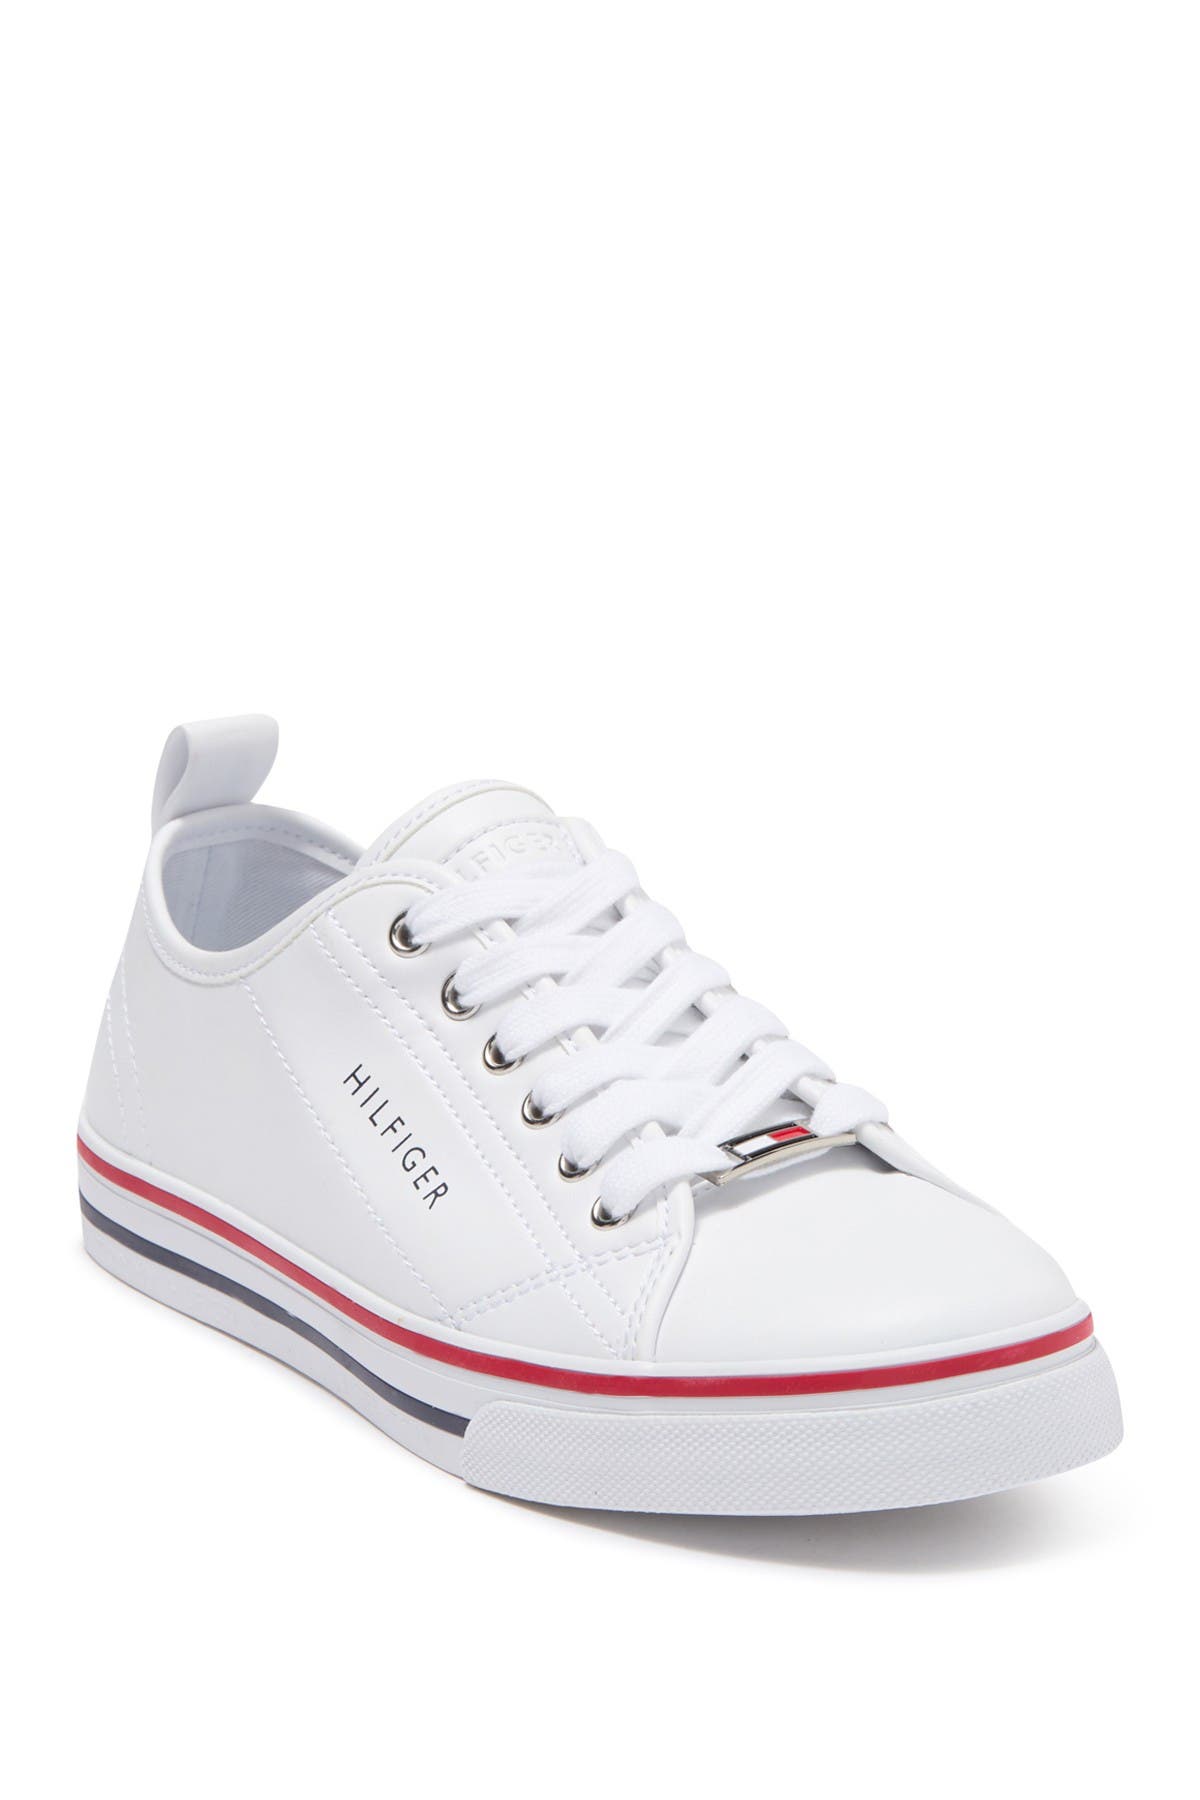 Tommy Hilfiger Sneakers for Women 